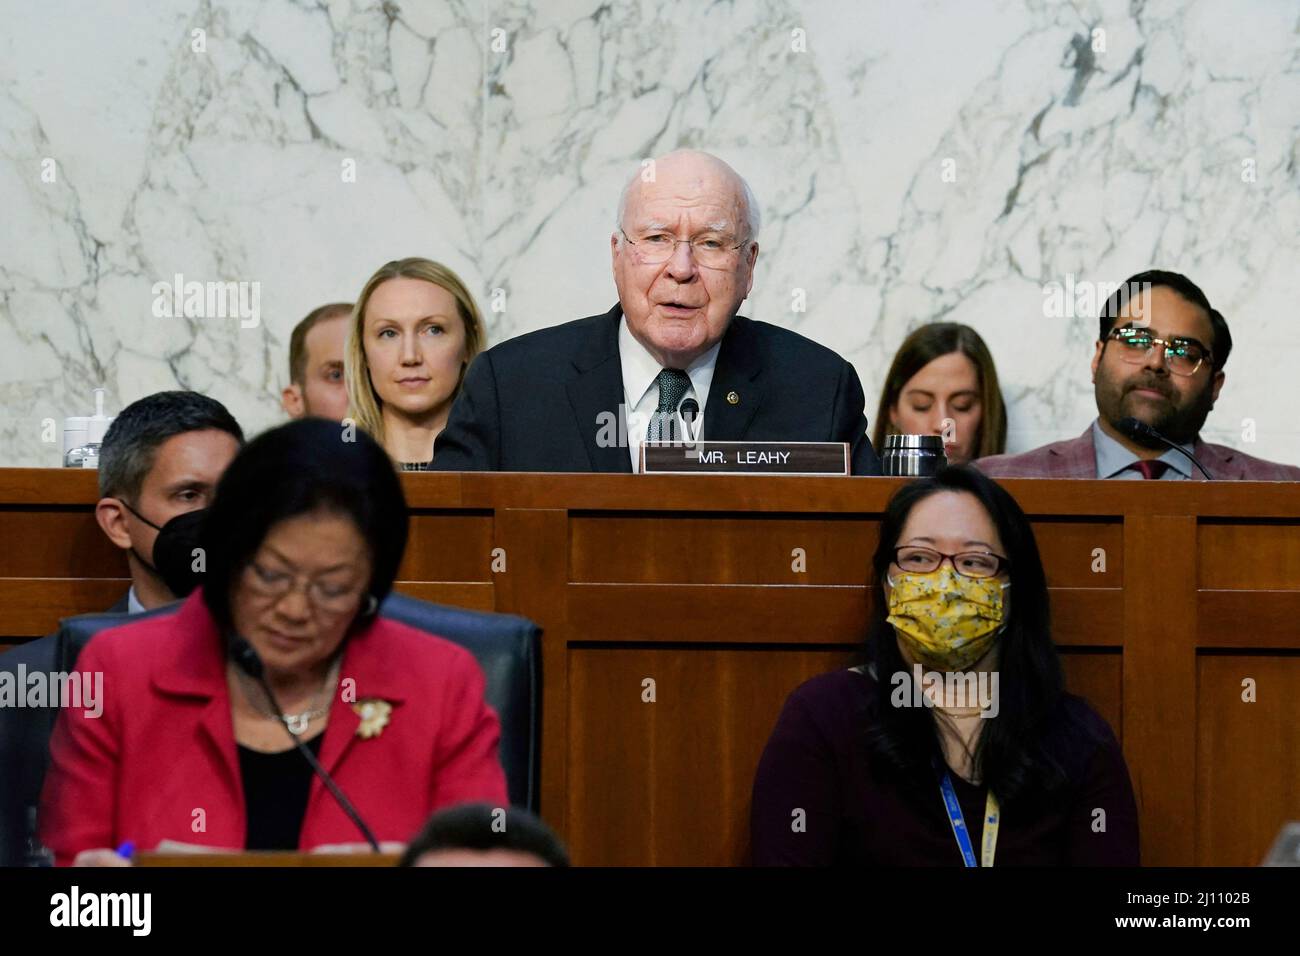 Sen. Patrick Leahy, D-Vt., center, makes an opening statement during the confirmation hearing for Supreme Court nominee Ketanji Brown Jackson, Monday, March 21, 2022, in Washington. Sen. Mazie Hirono, D-Hawaii, listens at left. Photo by J. Scott Applewhite/Pool/ABACAPRESS.COM Stock Photo